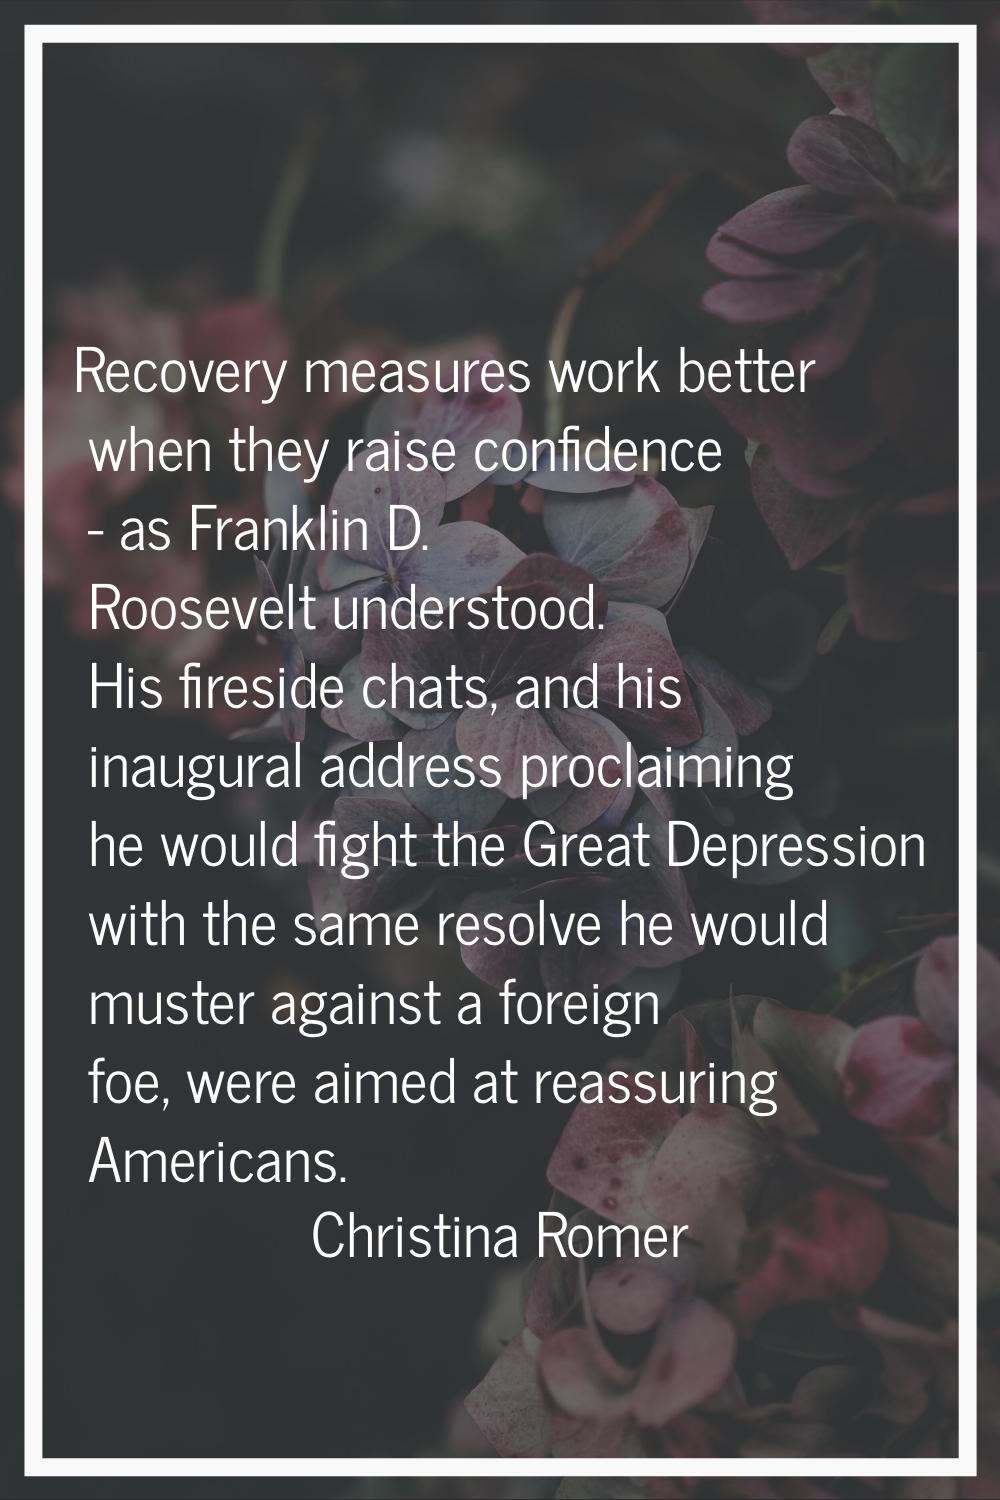 Recovery measures work better when they raise confidence - as Franklin D. Roosevelt understood. His